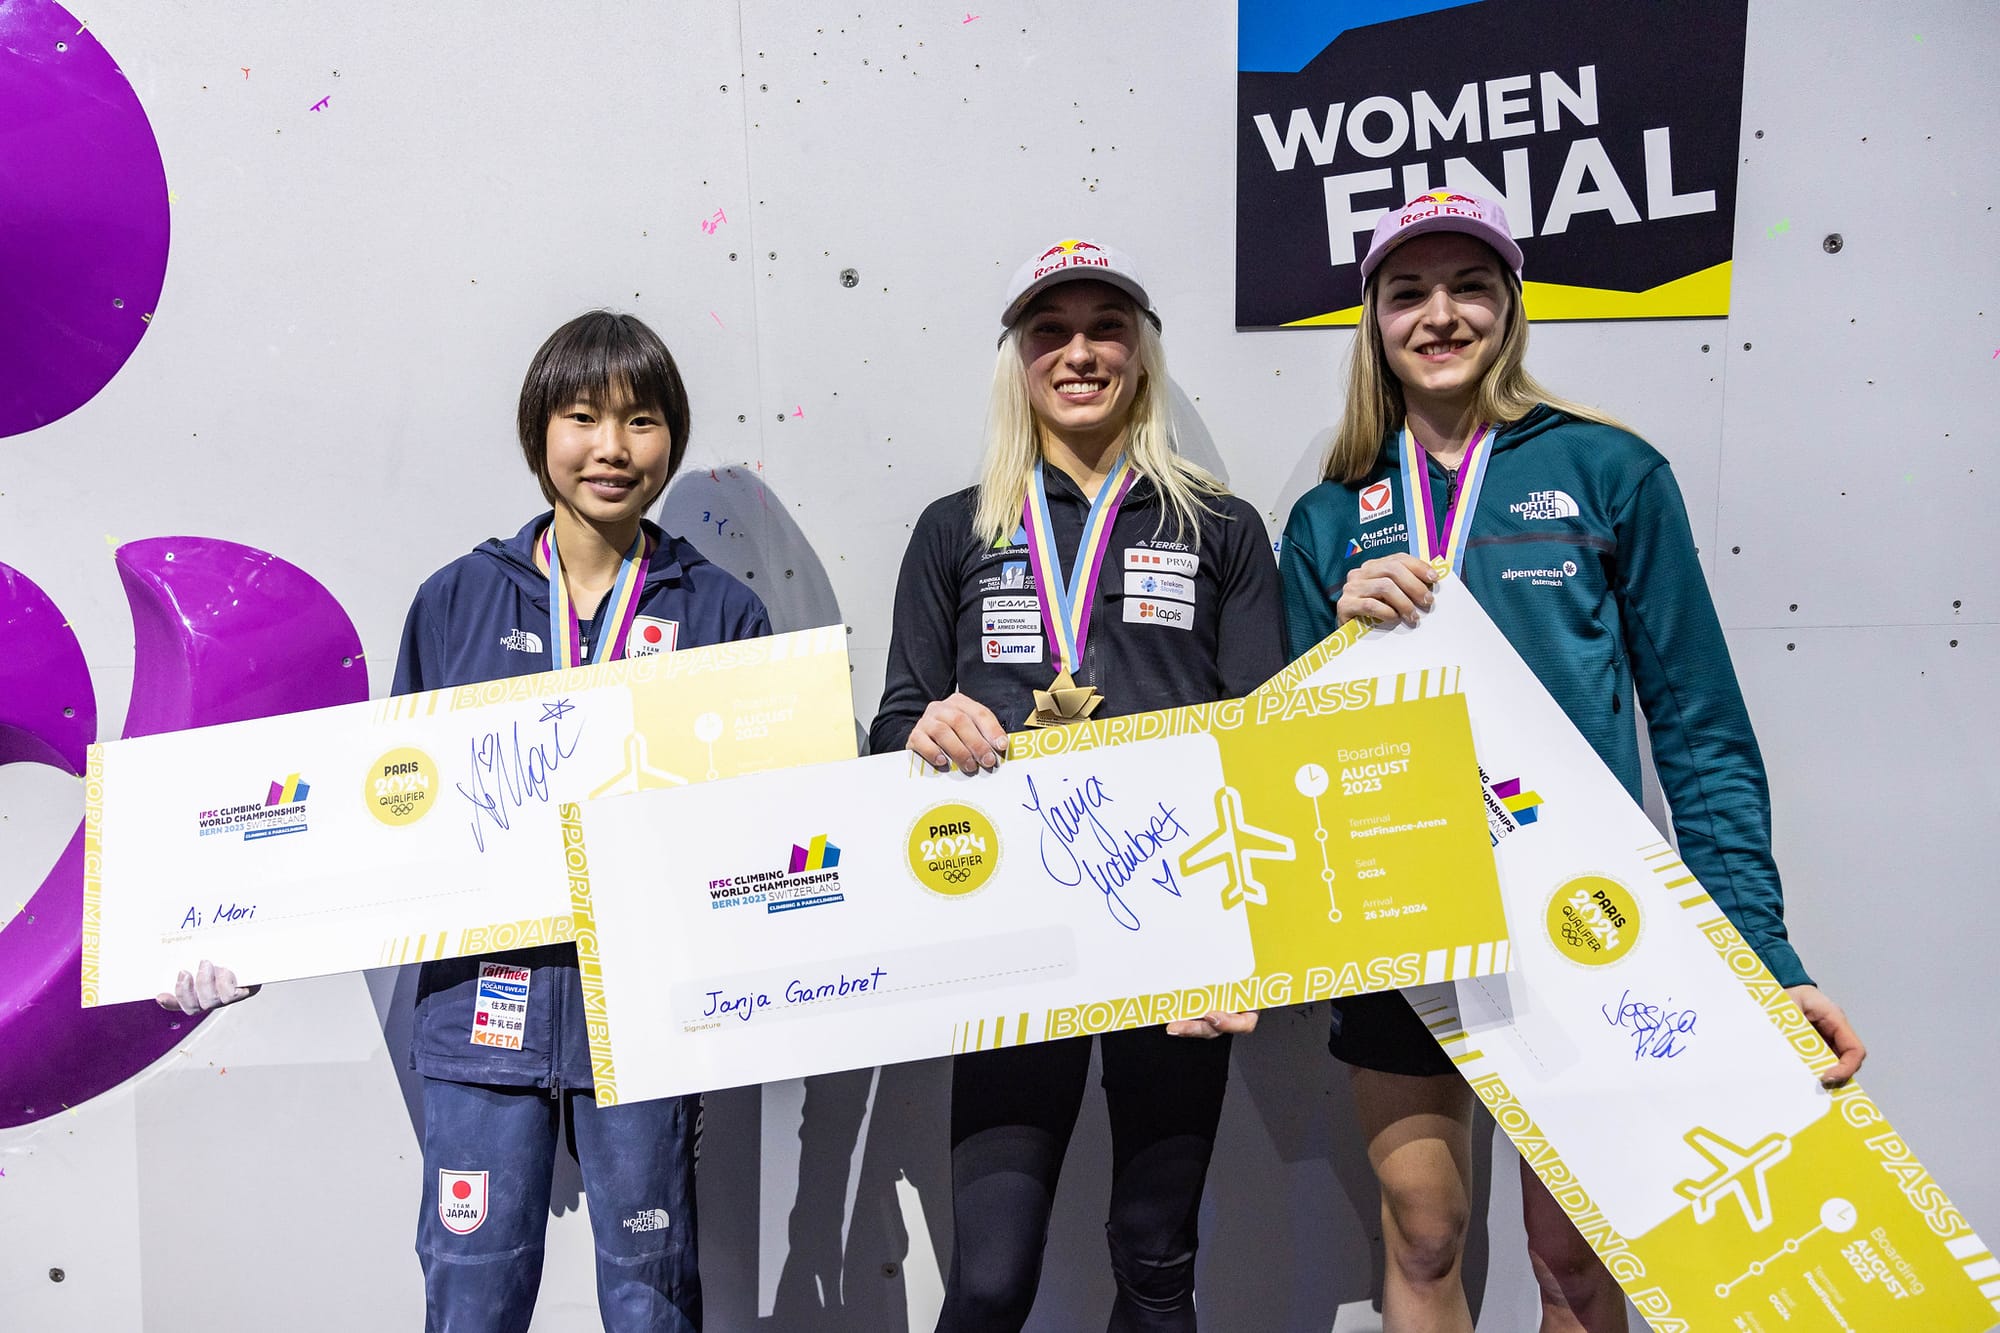 Janja Garnbret, Jessica Pilz and Ai Mori on the podium with their Olympic tickets